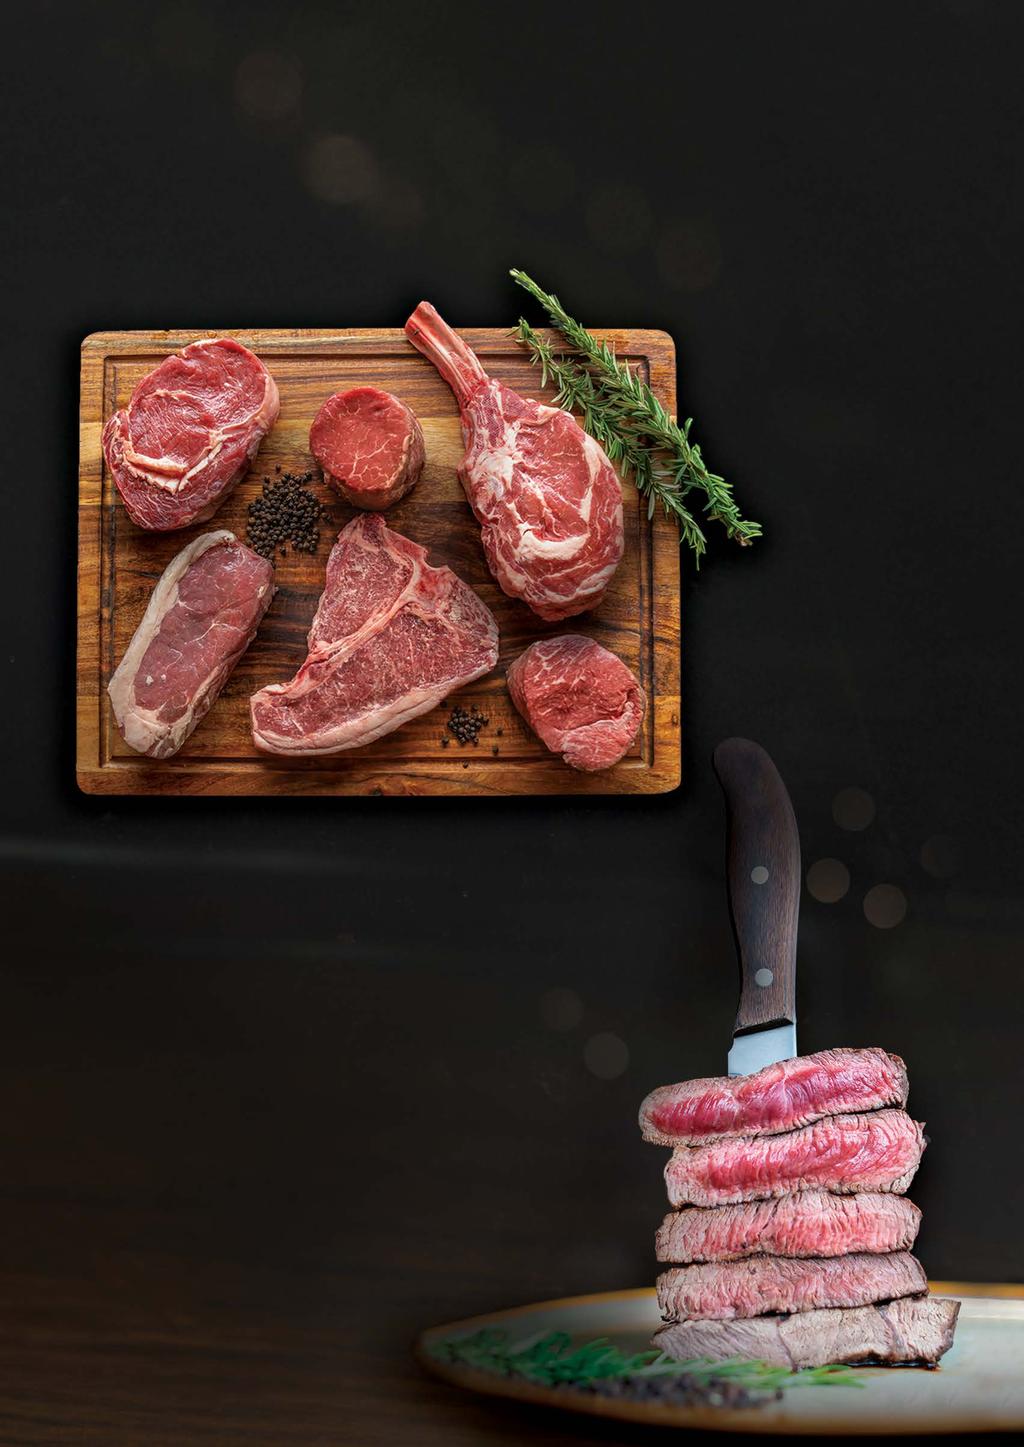 CHOOSE YOUR STEAK SCOTCH FILLET EYE FILLET SCOTCH FILLET Also known as Cube roll or Rib Eye is one of the most widely recognized cuts for it s tenderness & rich flavour.